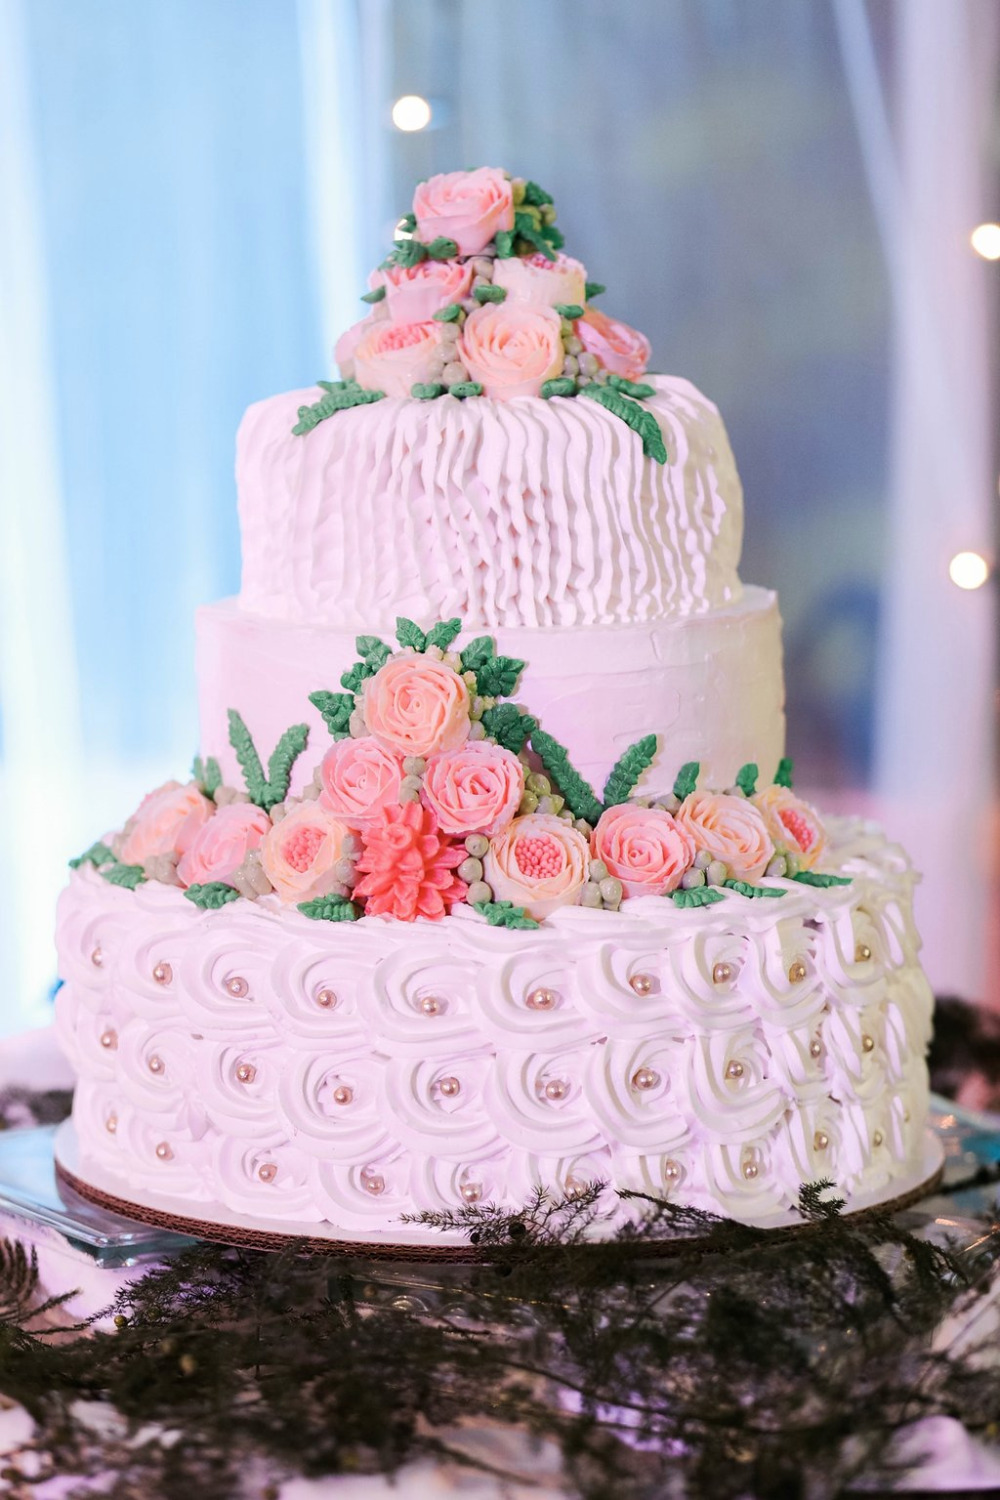 white and pink wedding cake made by the bride